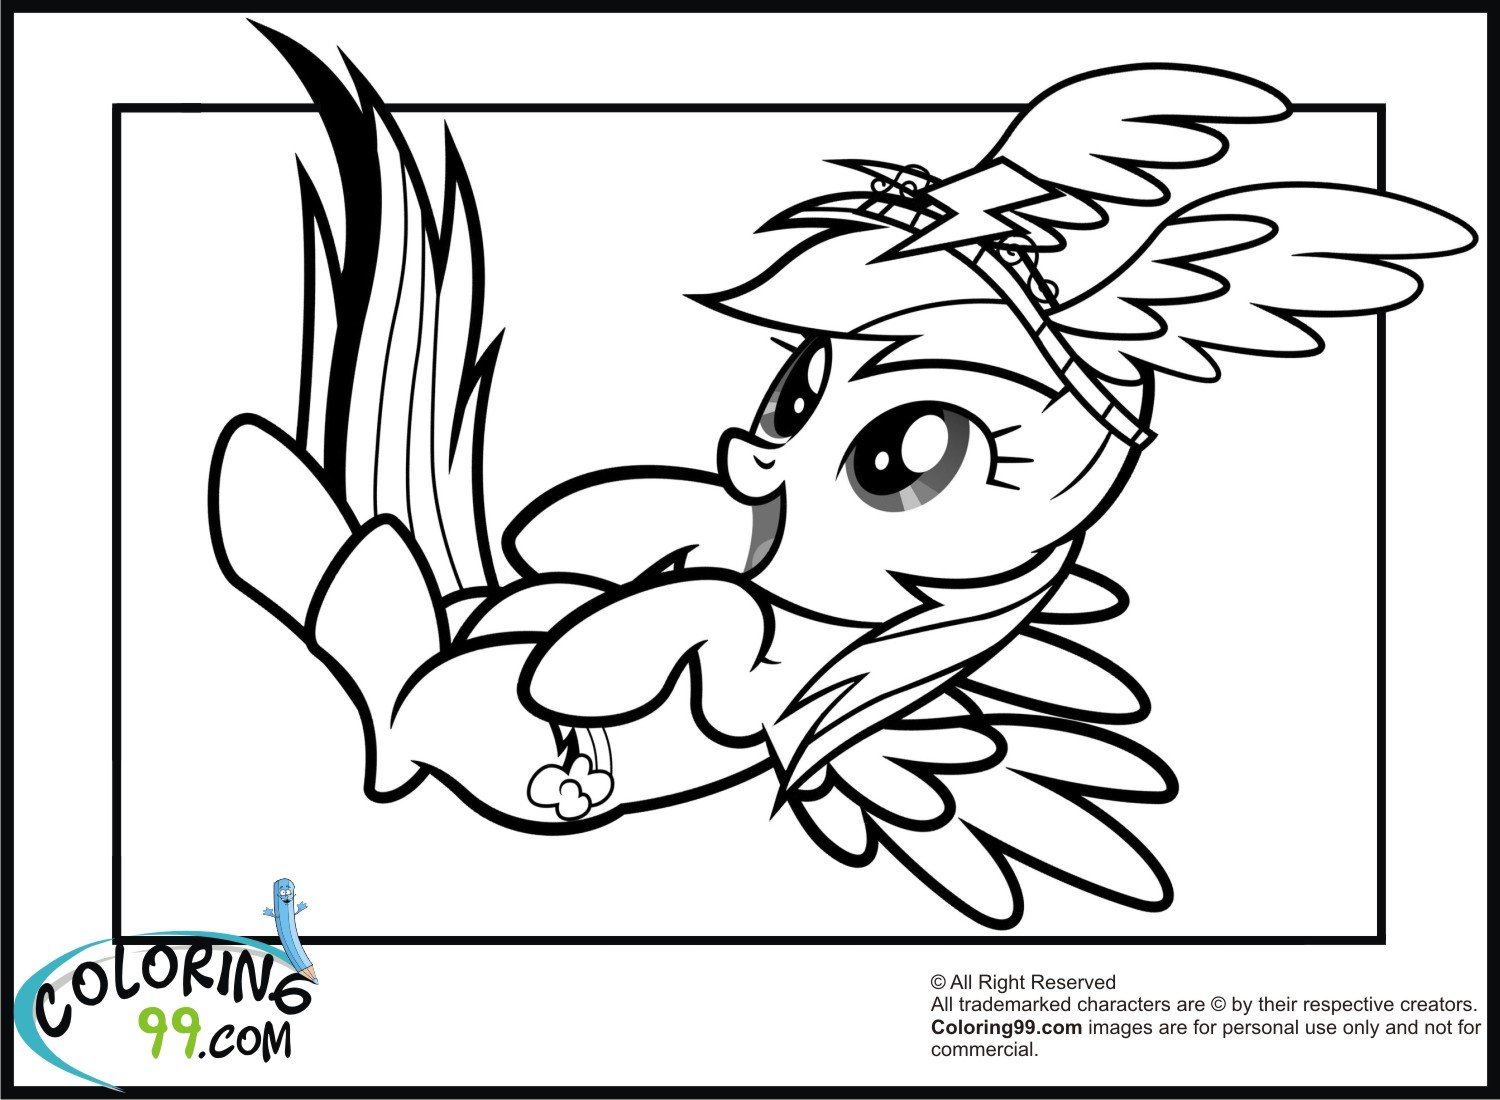  Rainbow  Dash  Coloring  Pages  Minister Coloring 